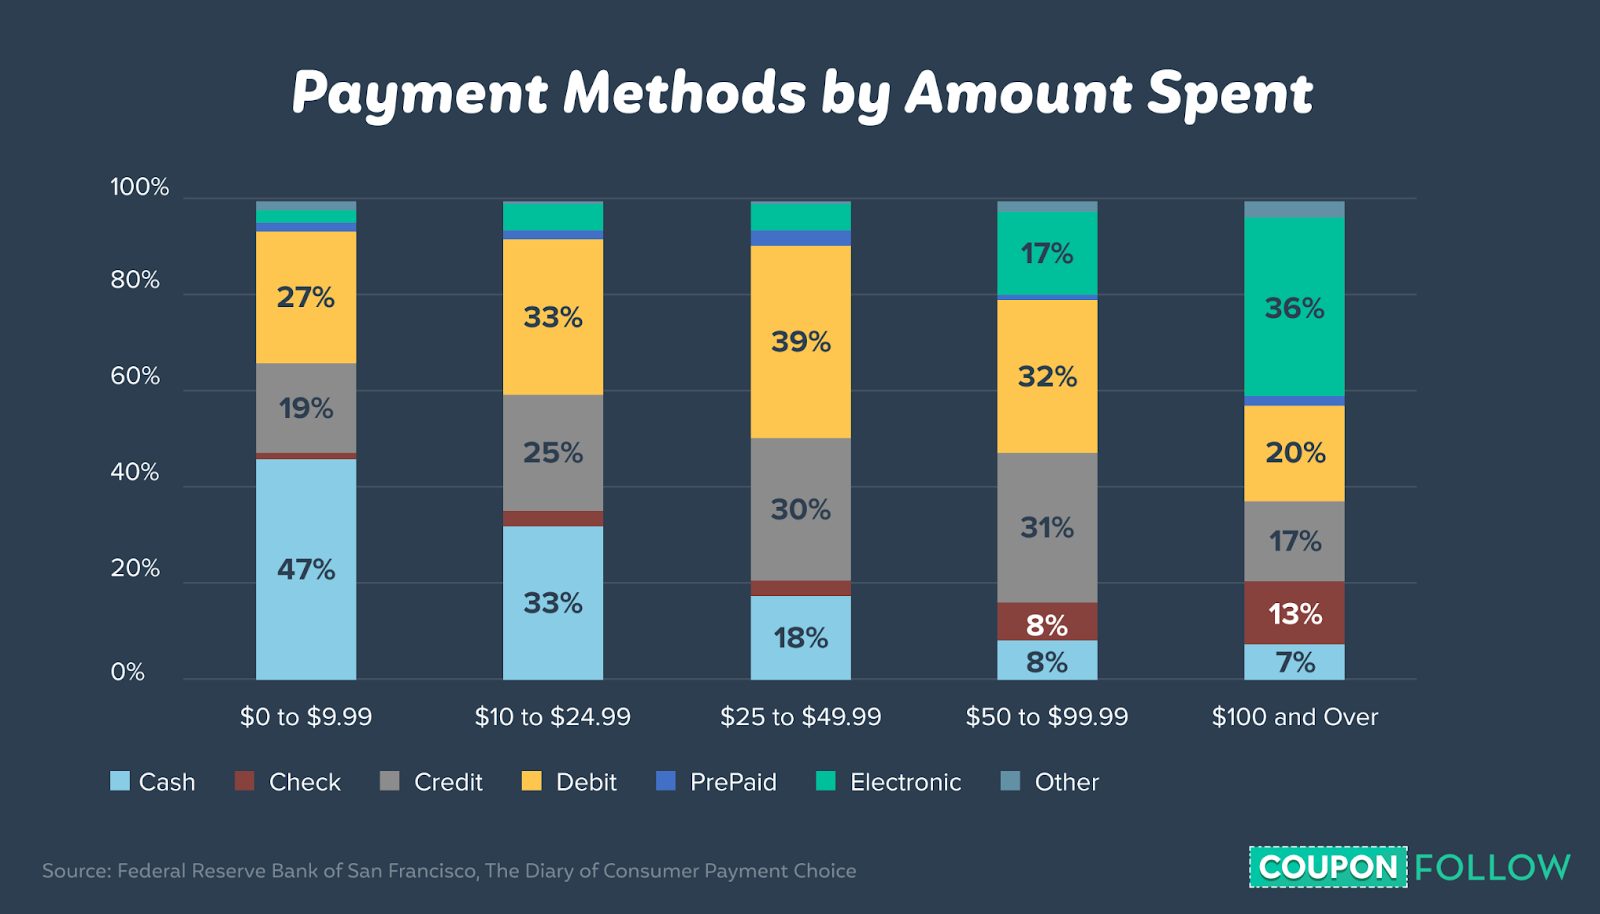 Typical payment method by amount spent